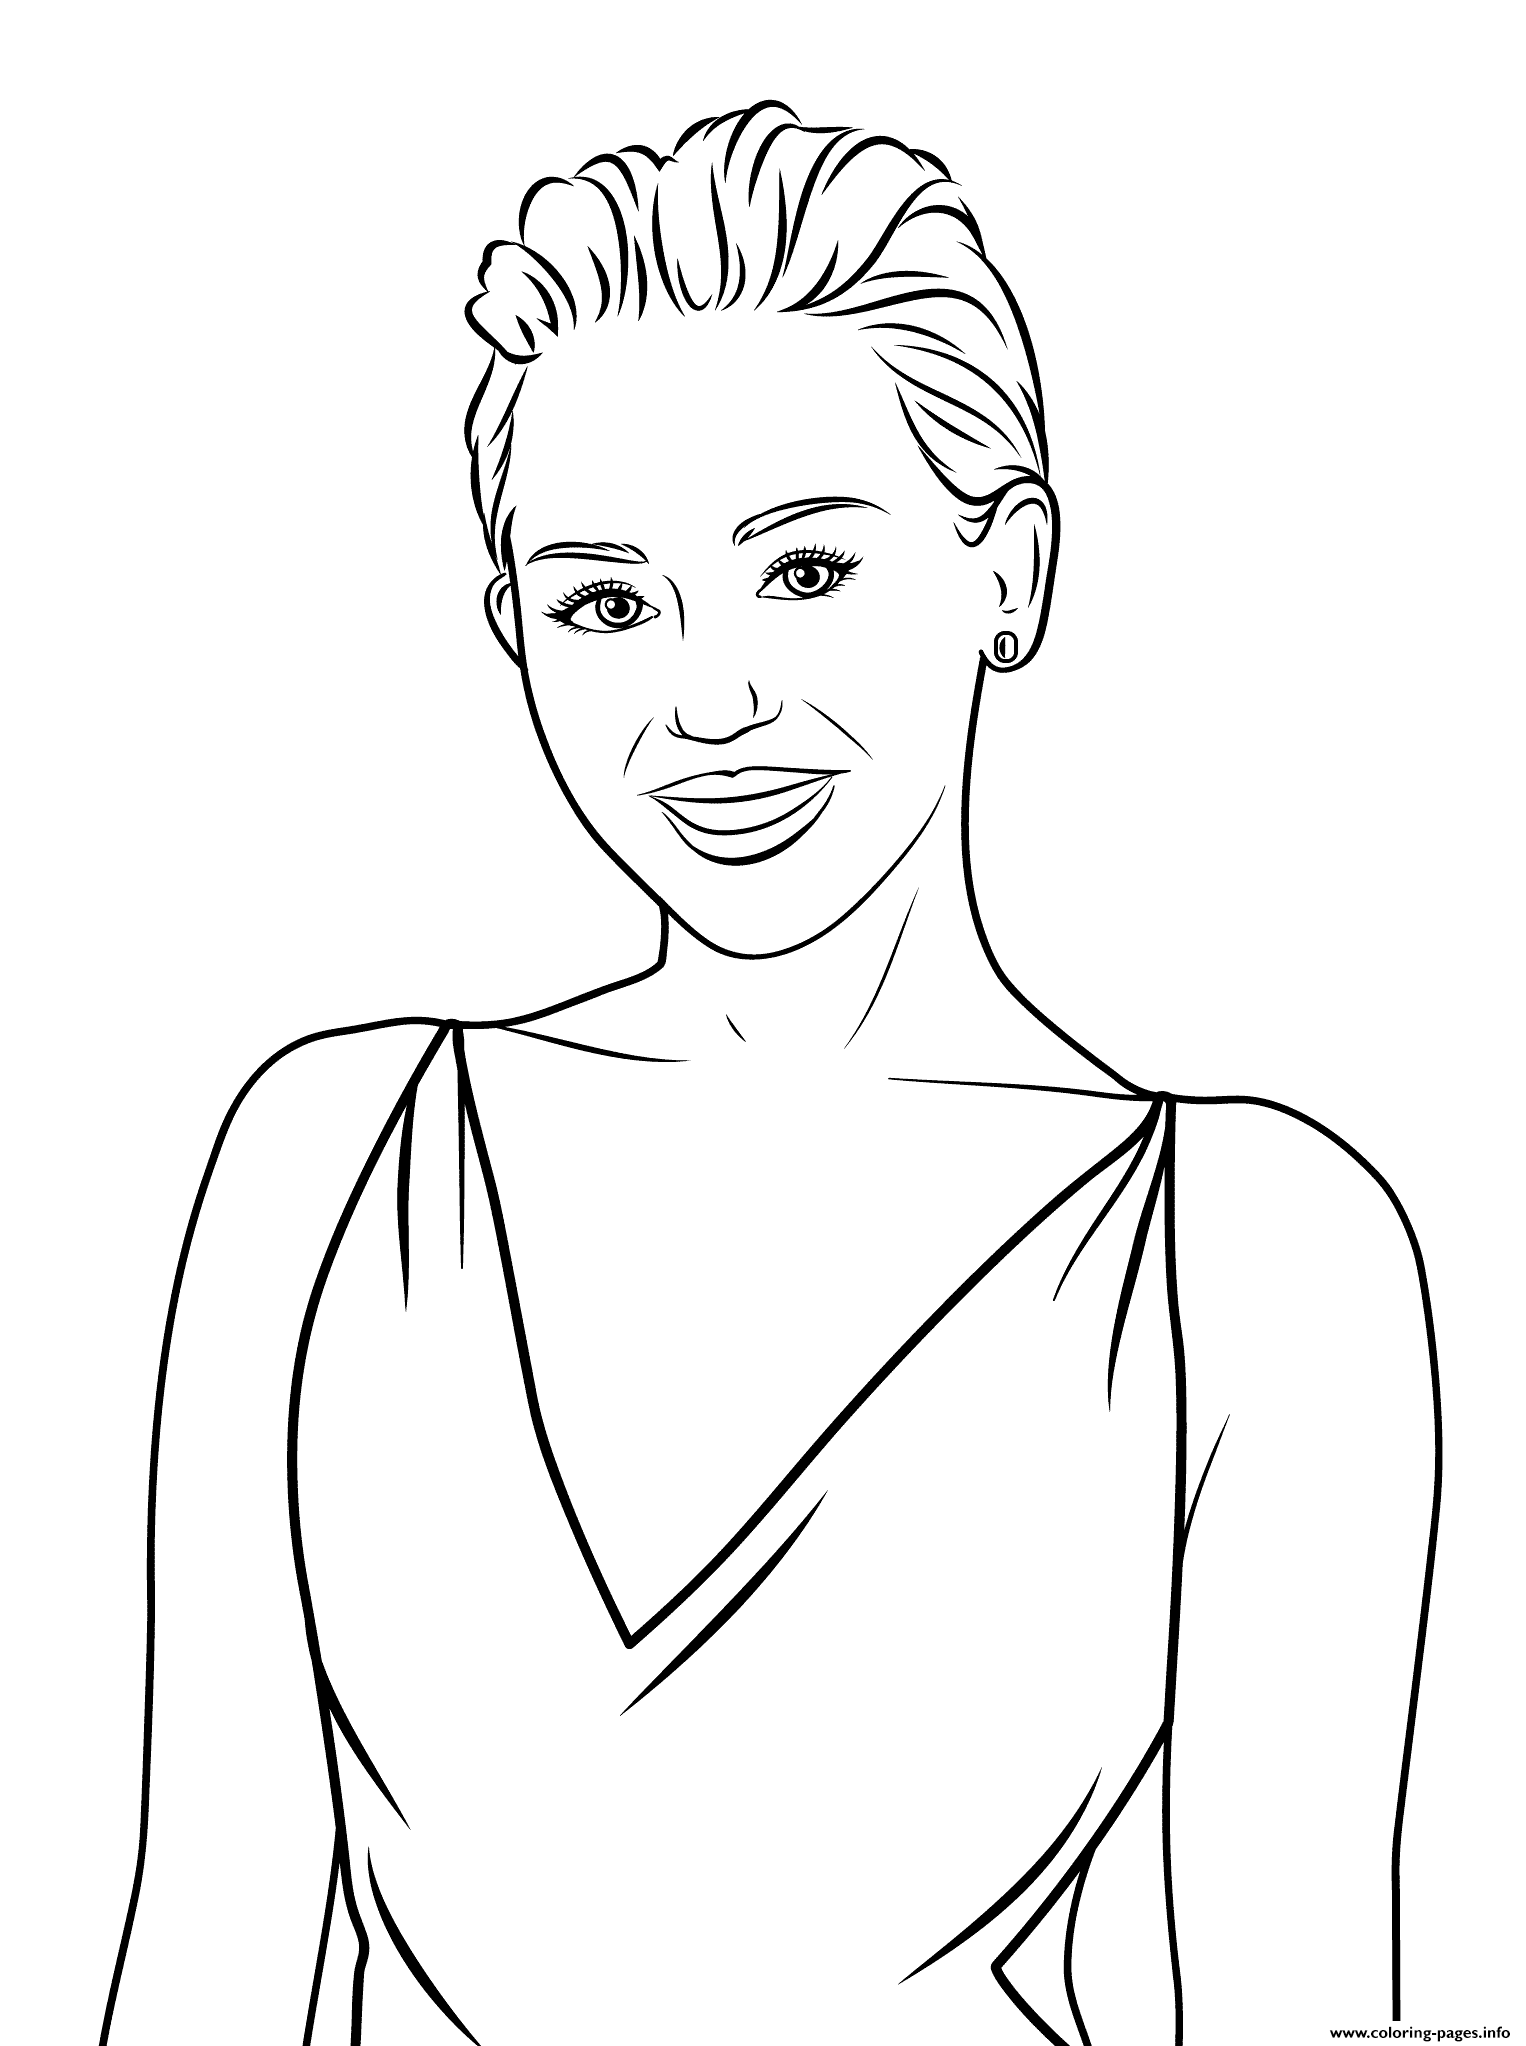 Miley Cyrus Celebrity Coloring Pages Printable